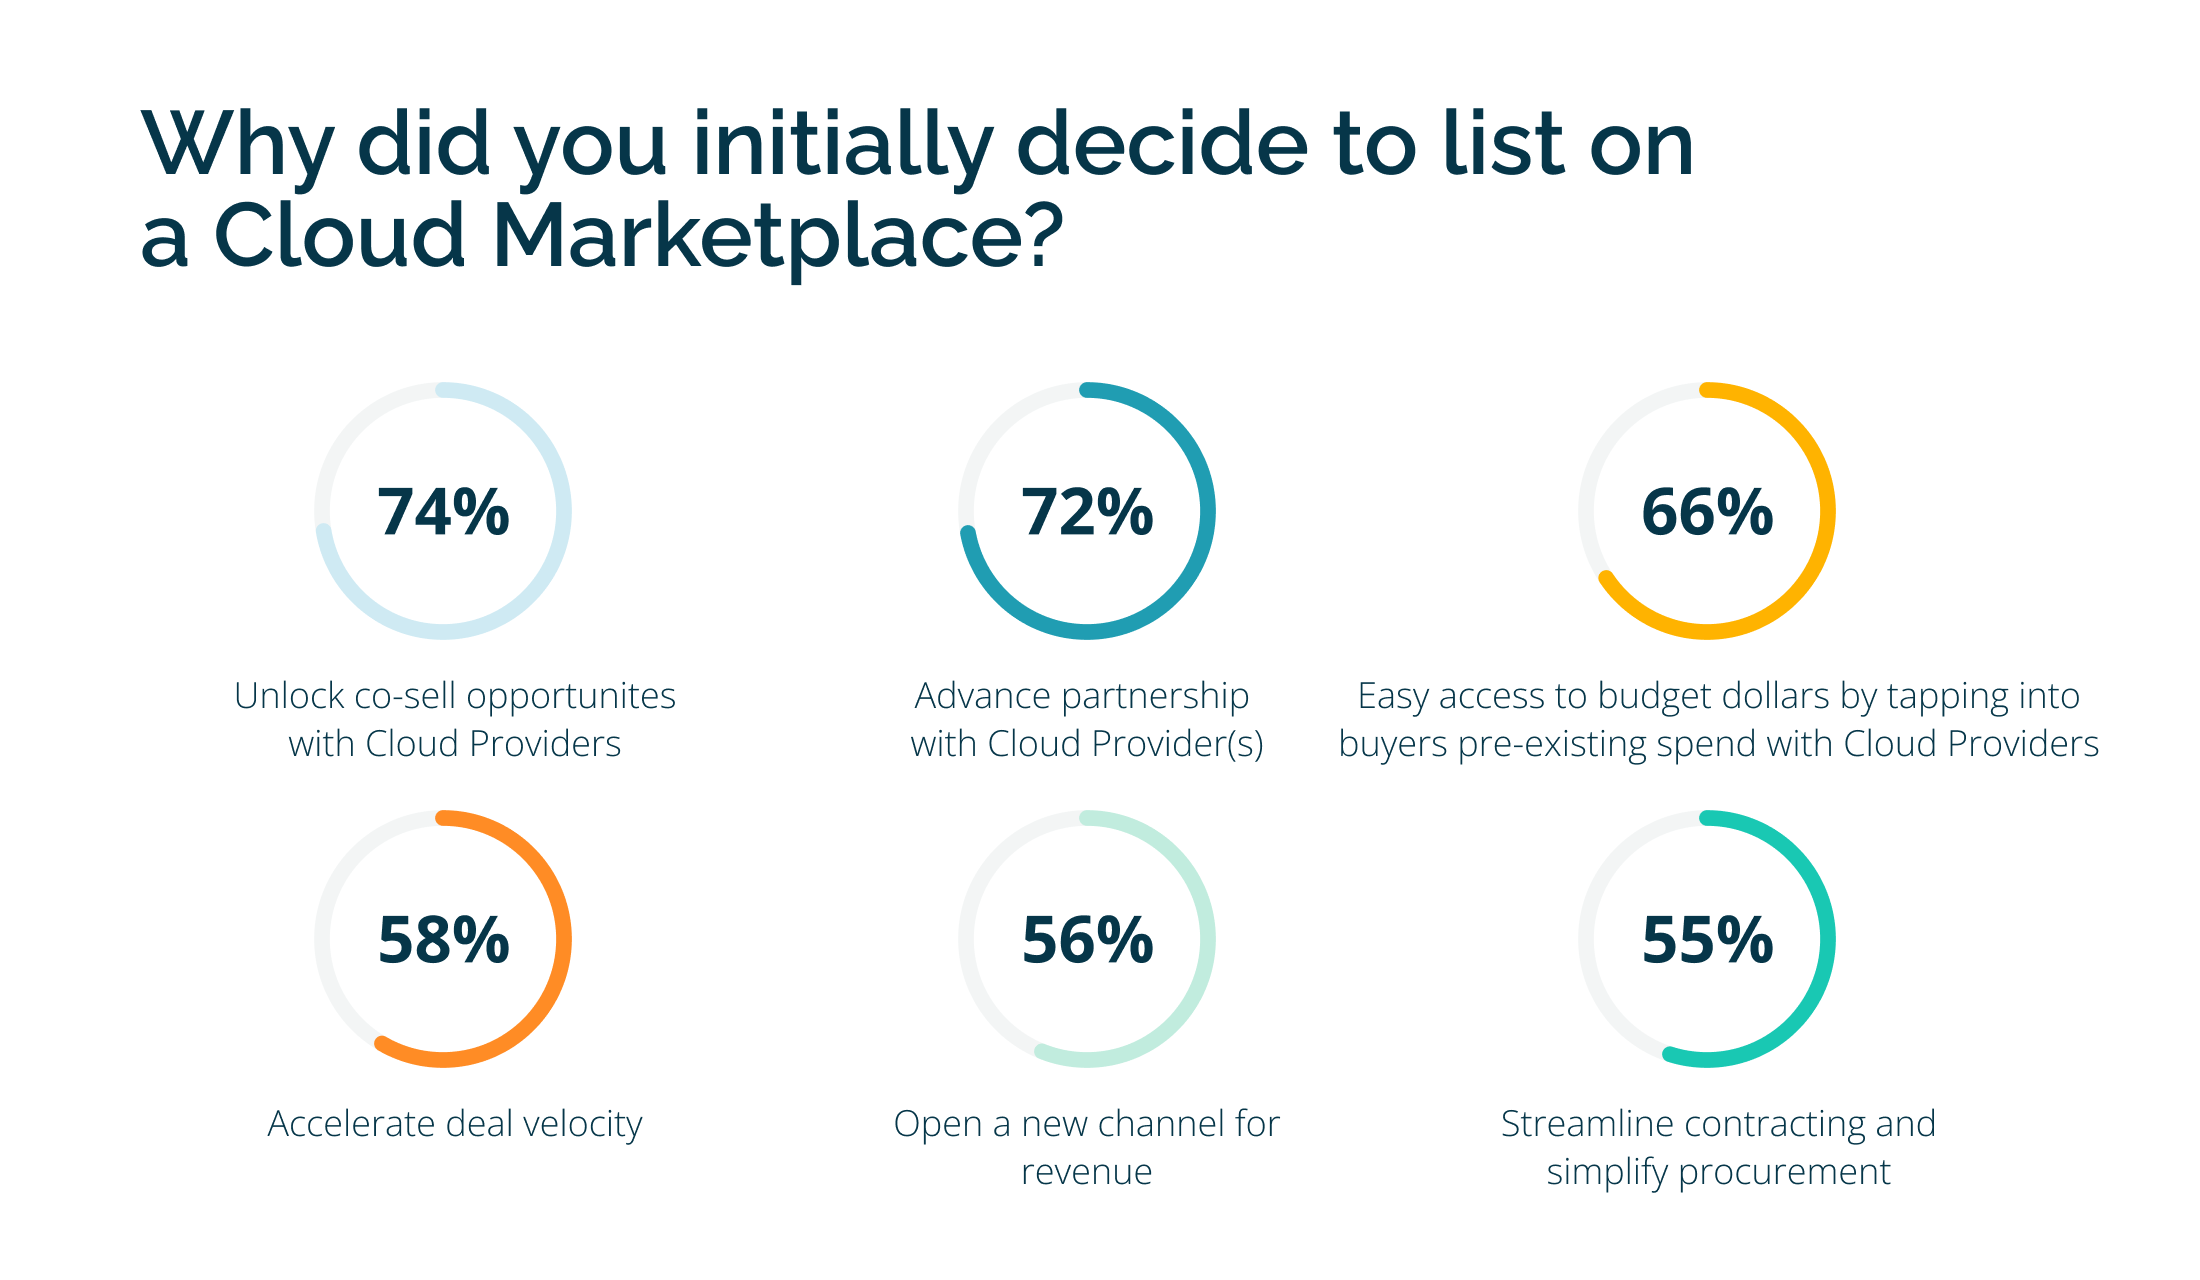  Why did you initially decide to list on a cloud marketplace